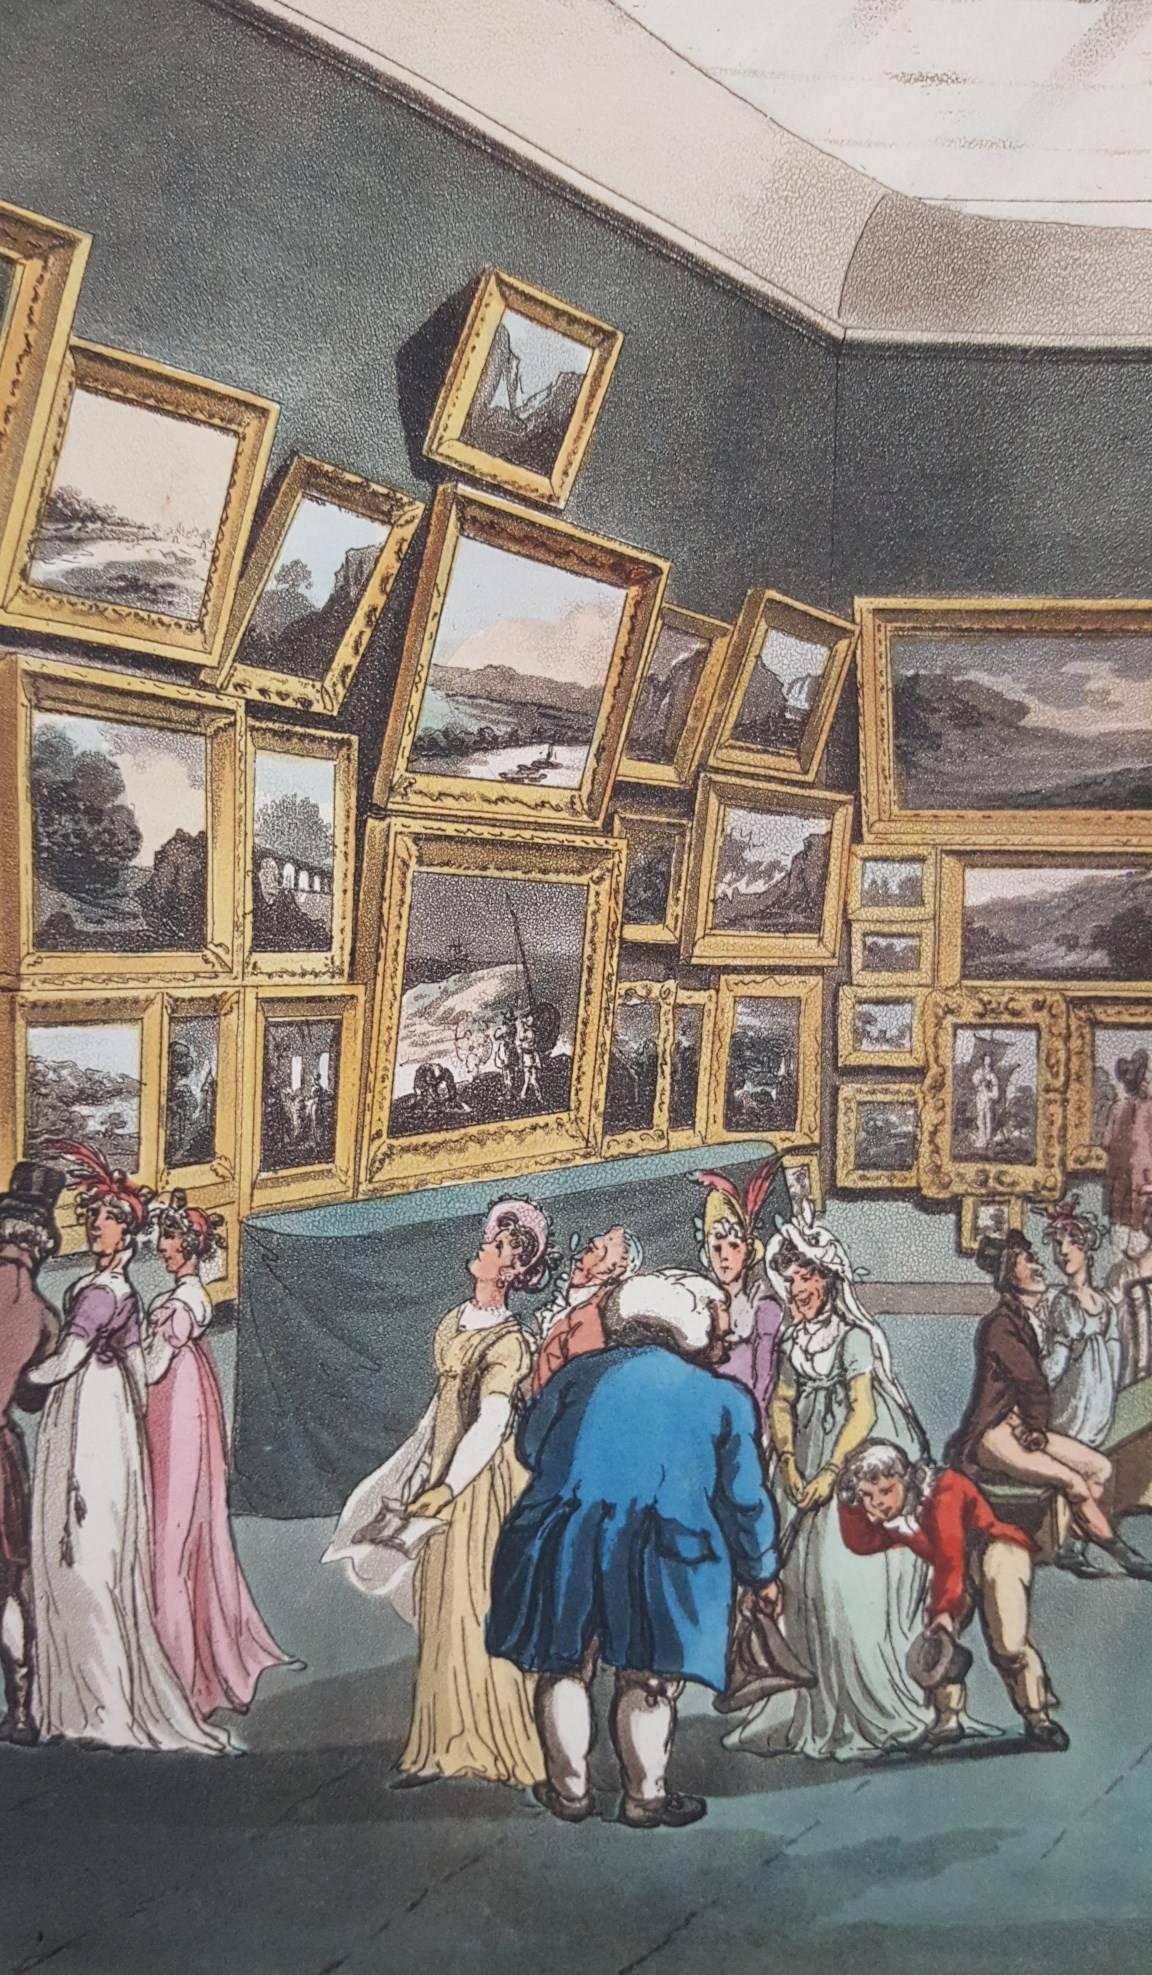 Exhibition of Water Coloured Drawings, Old Bond Street - Gray Interior Print by Thomas Rowlandson